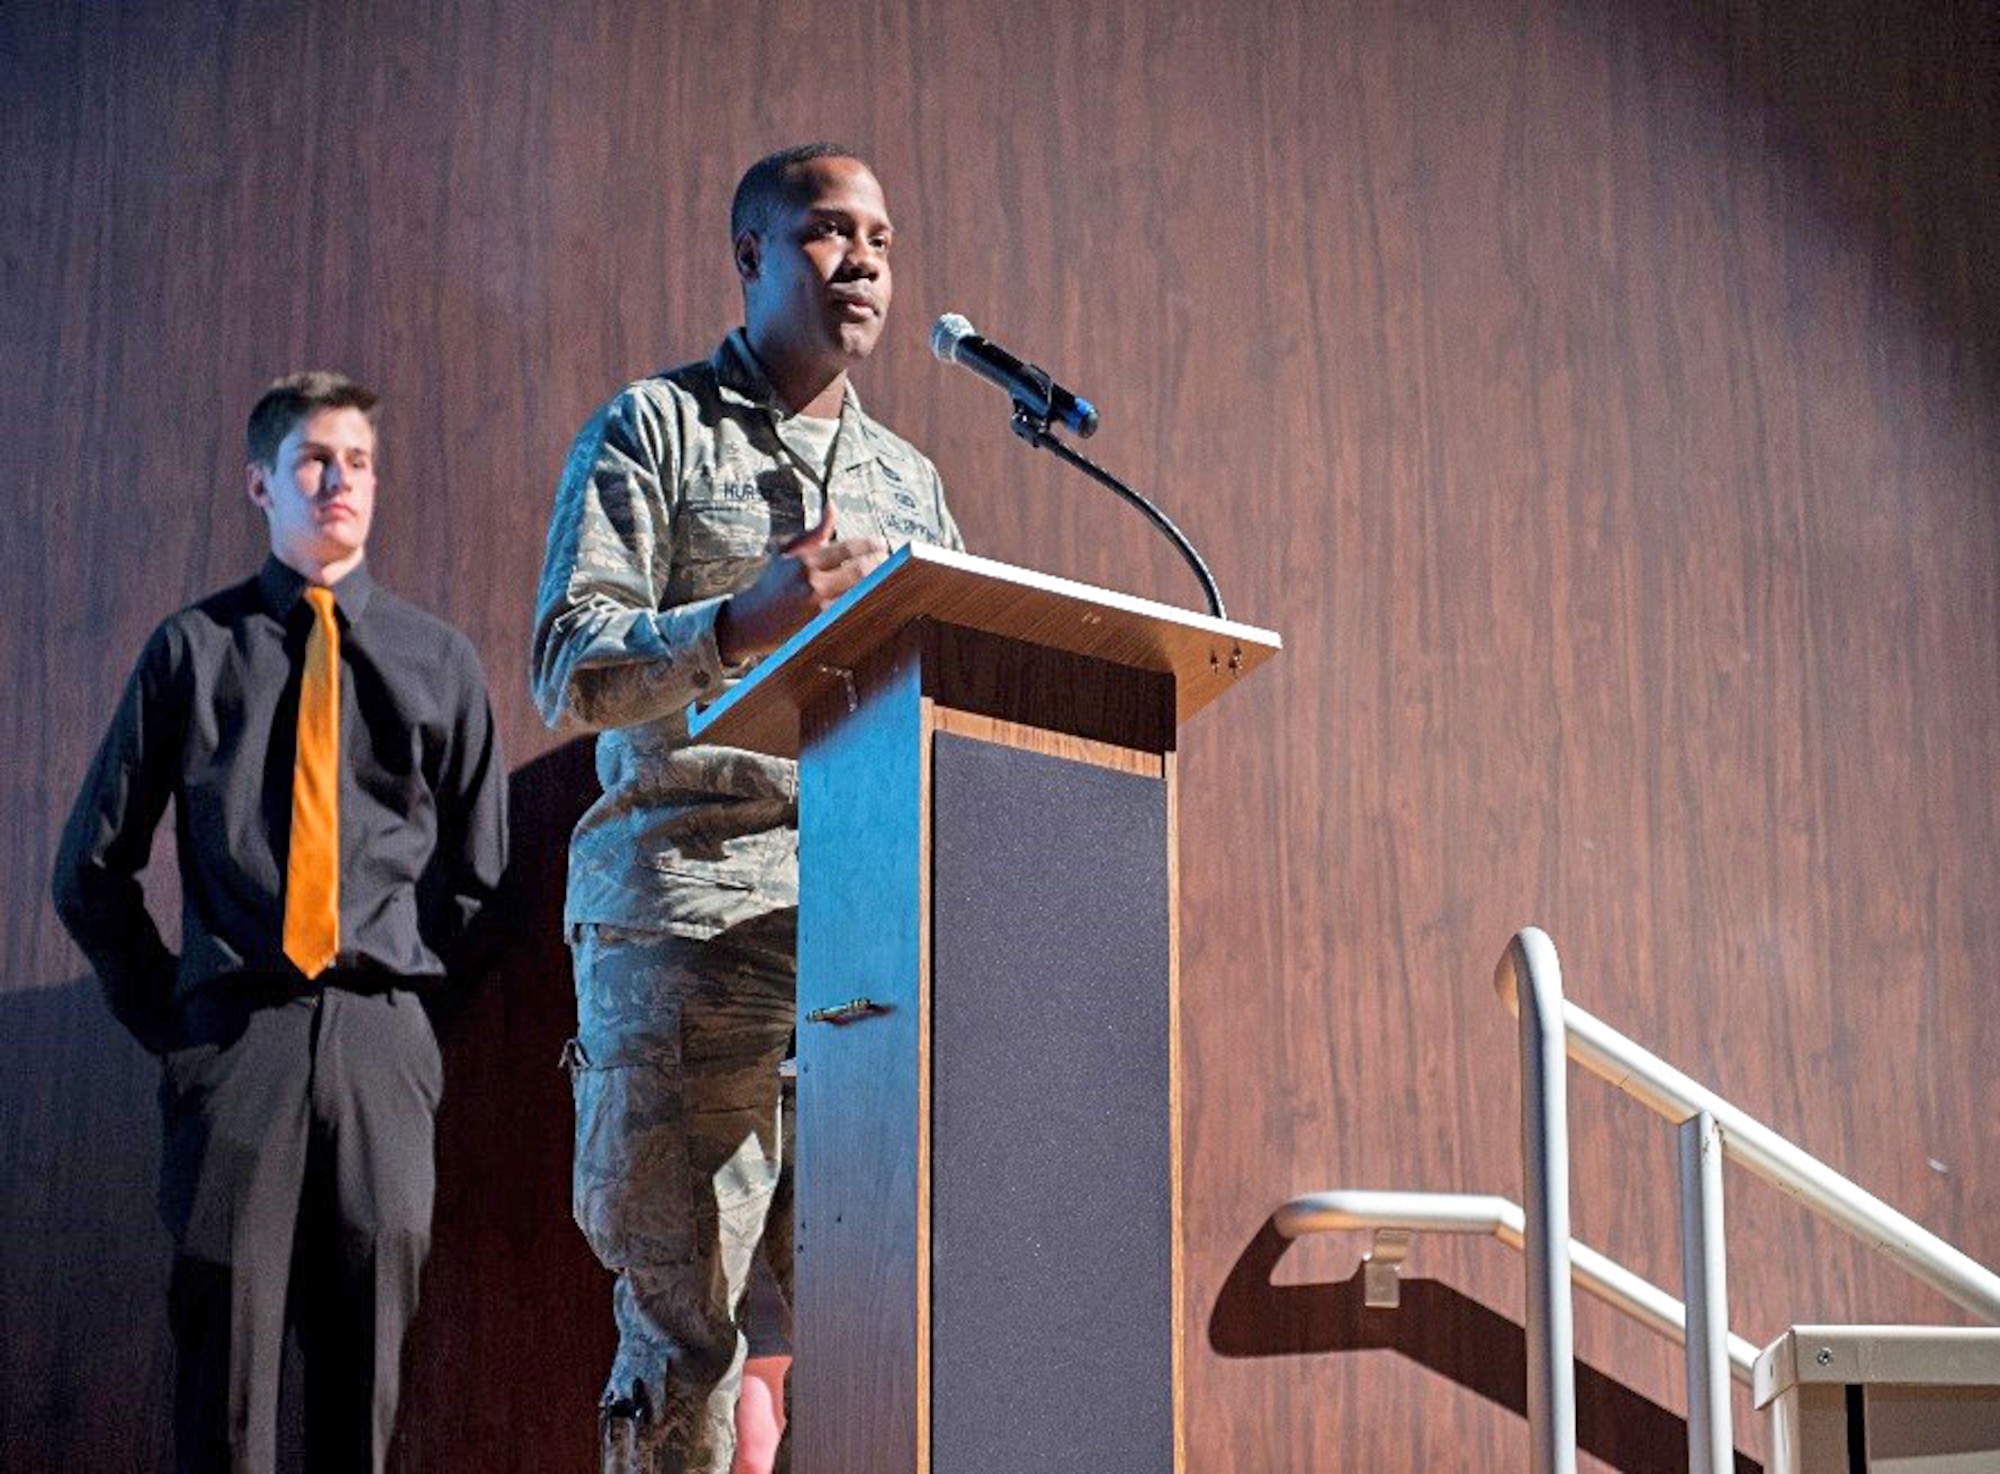 1st Lt. Harvey Hurst, Air Force Research Laboratory Rocket Propulsion Division program manager, speaks to a crowd at Lancaster High School March 23. (U.S. Air Force photo by Kyle Larson)